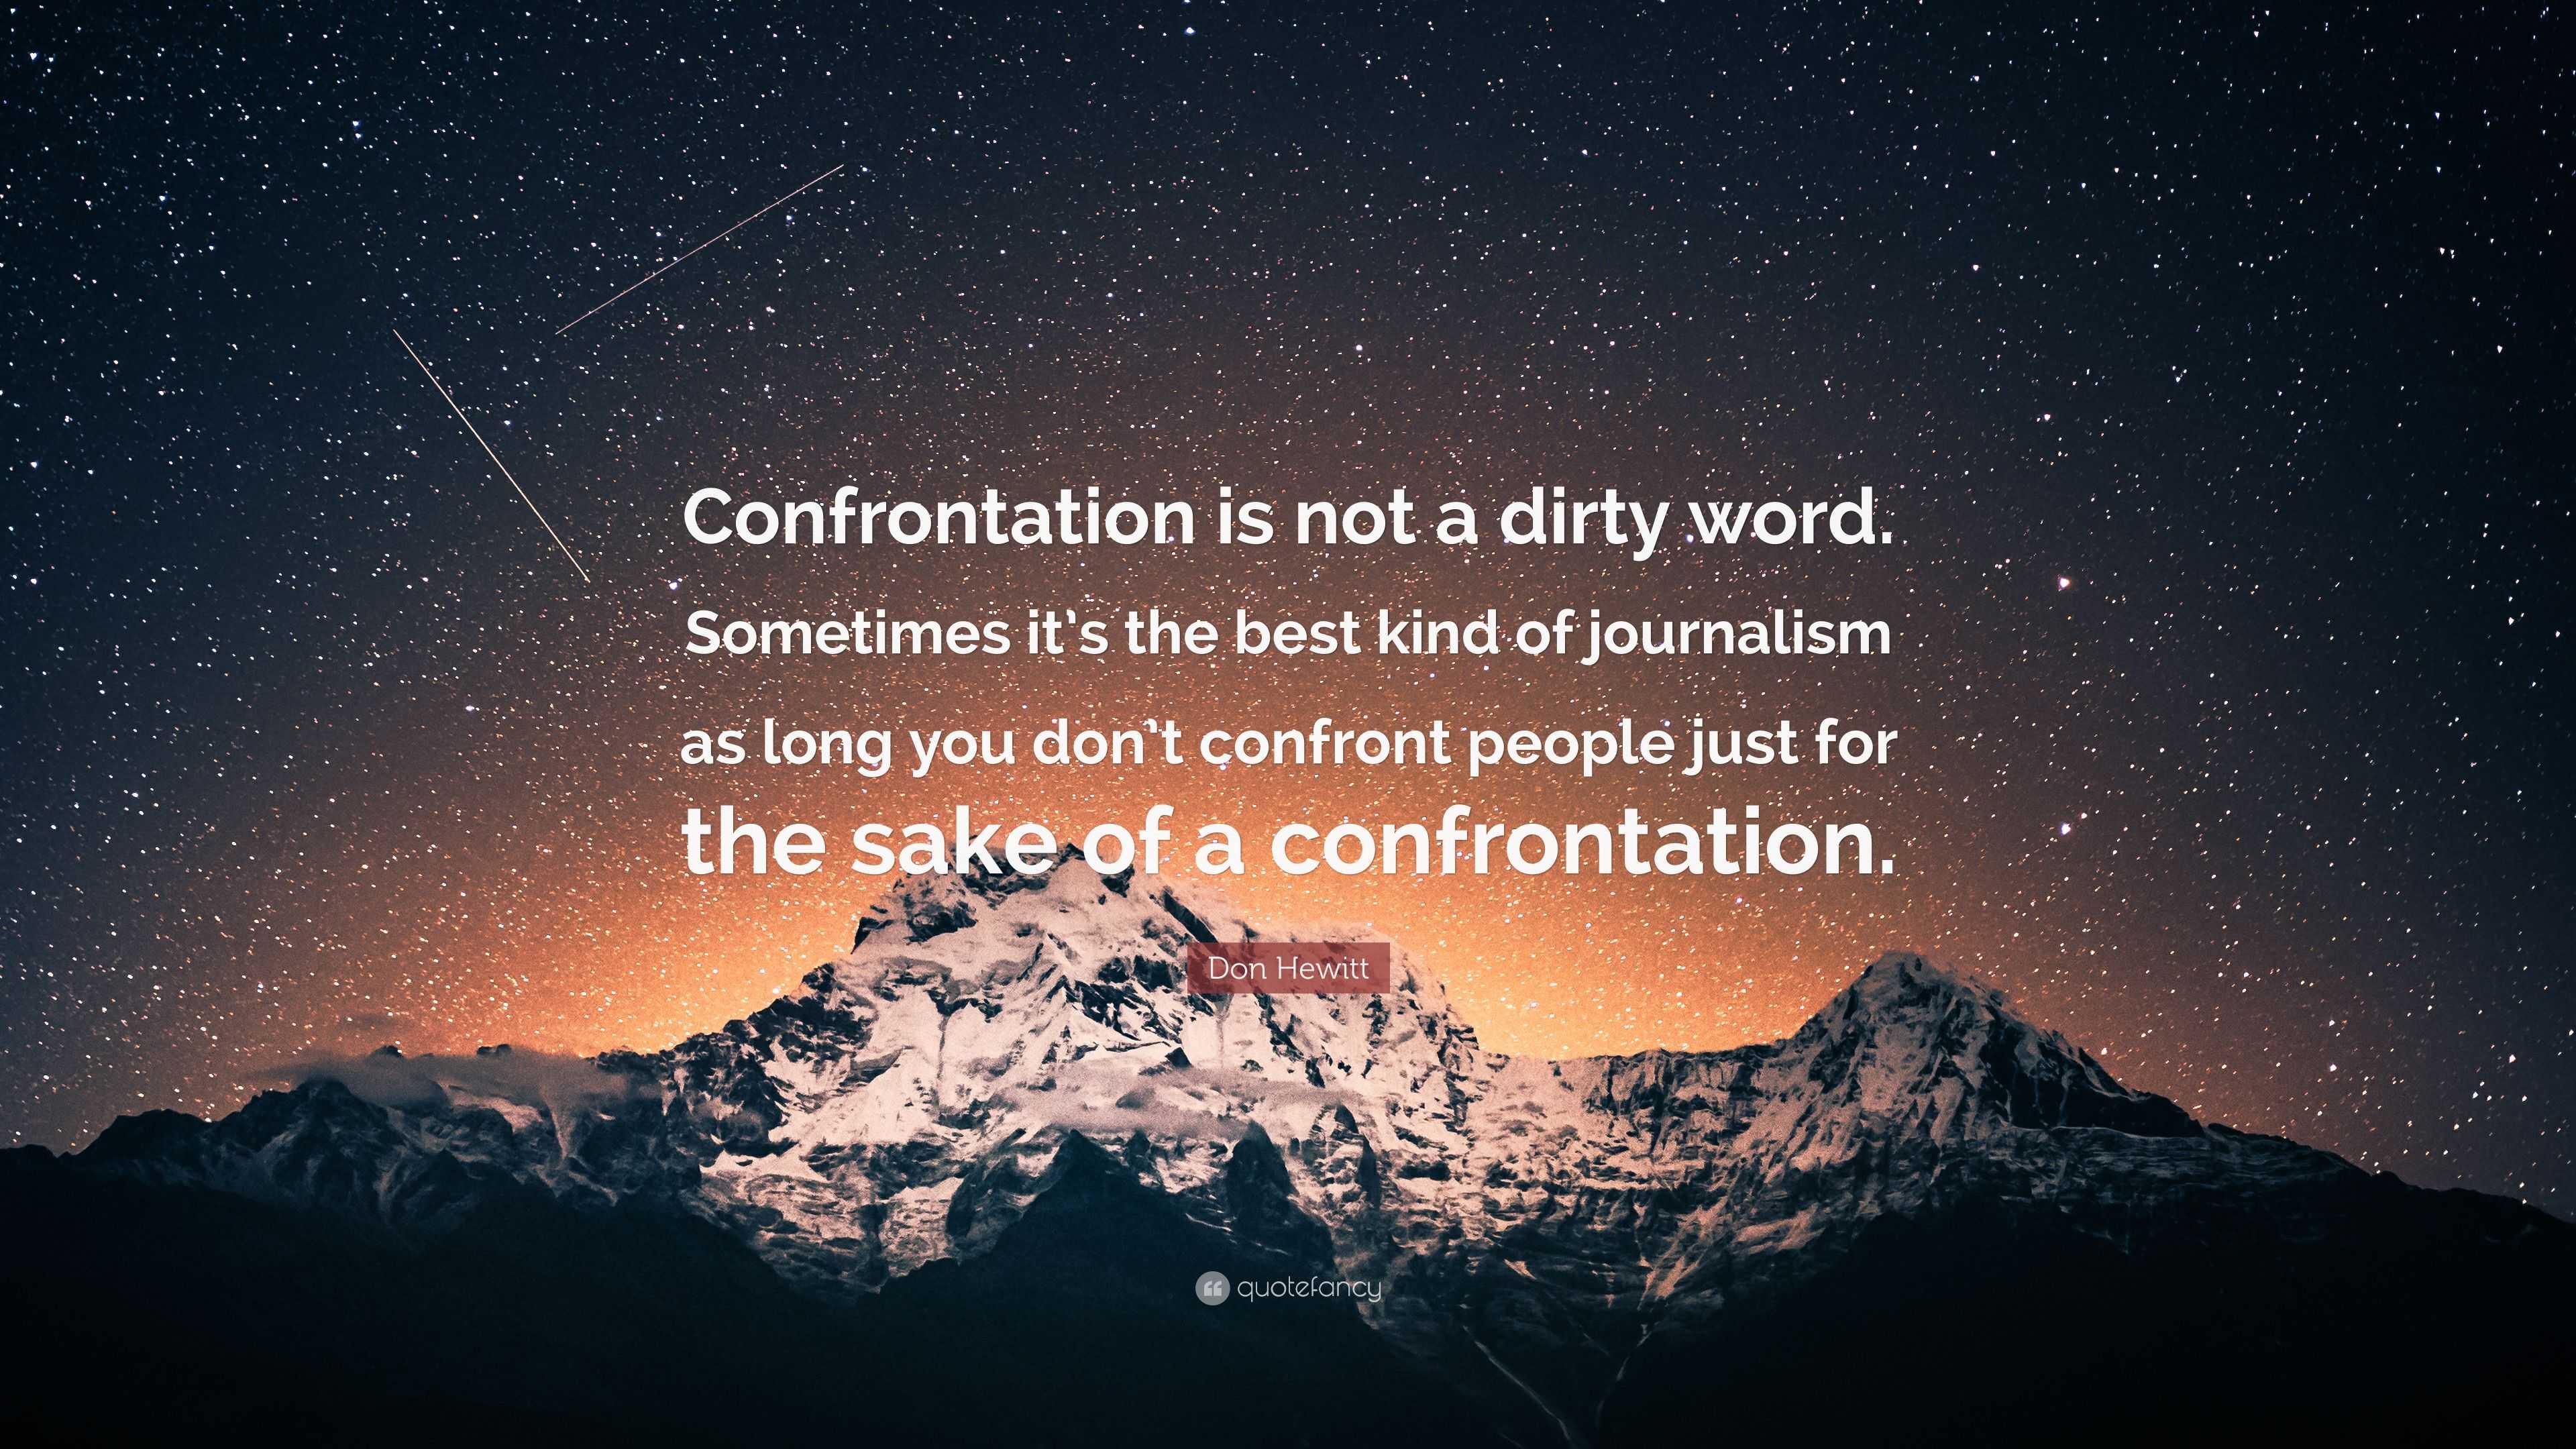 How long is Confrontation?